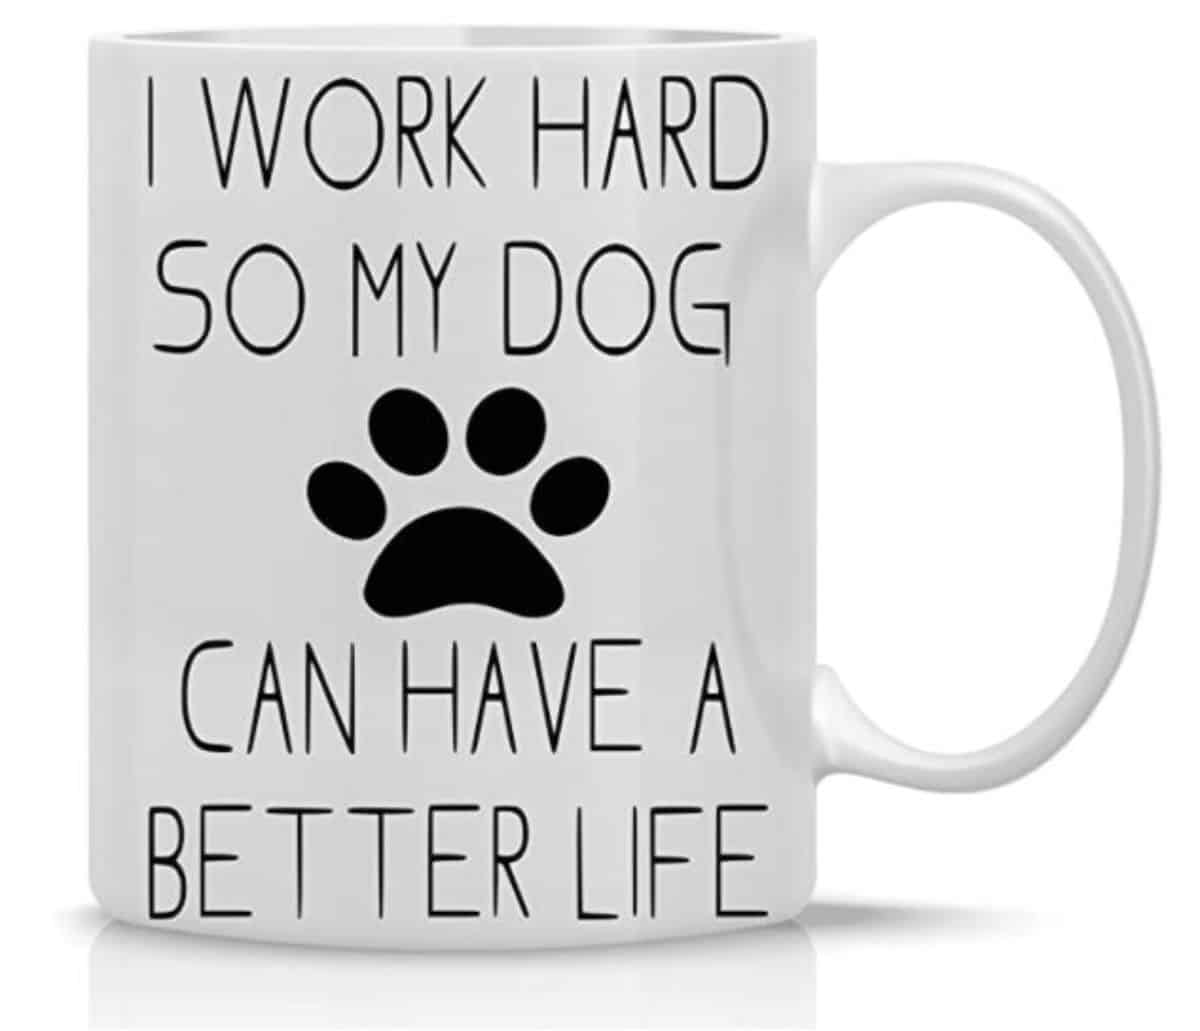 I work hard so my dog can have a better life 